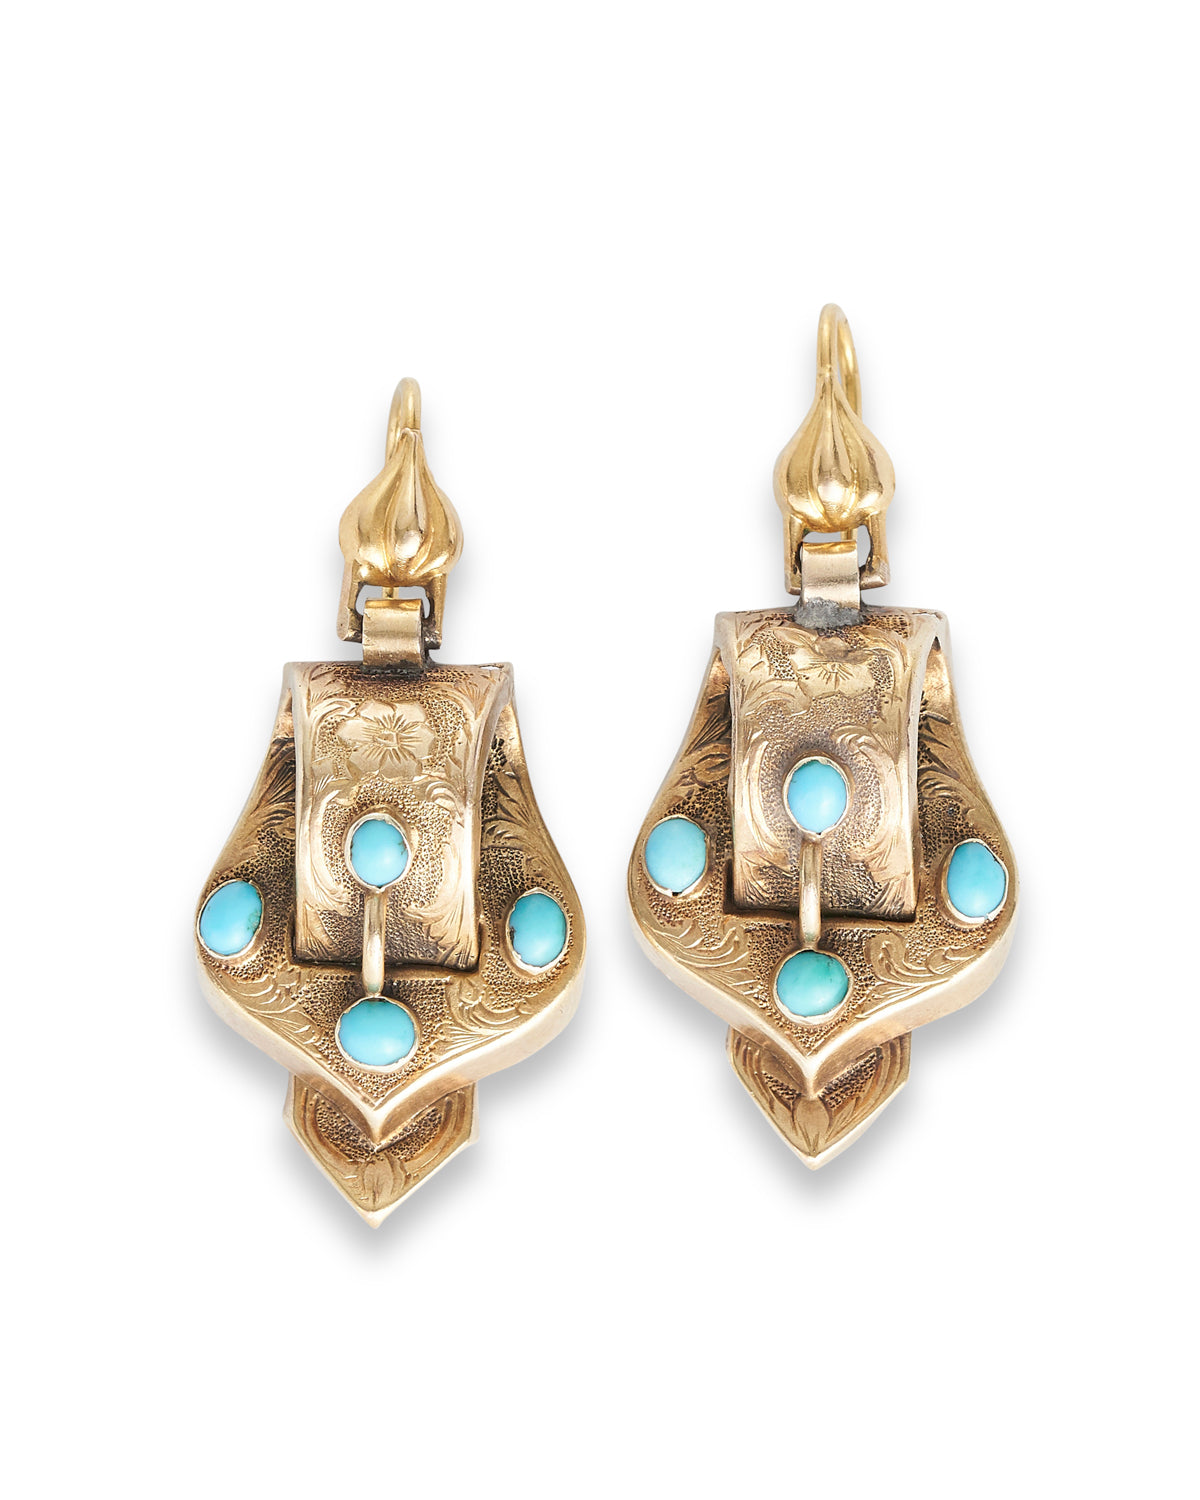 Victorian Gold & Turquoise Earrings